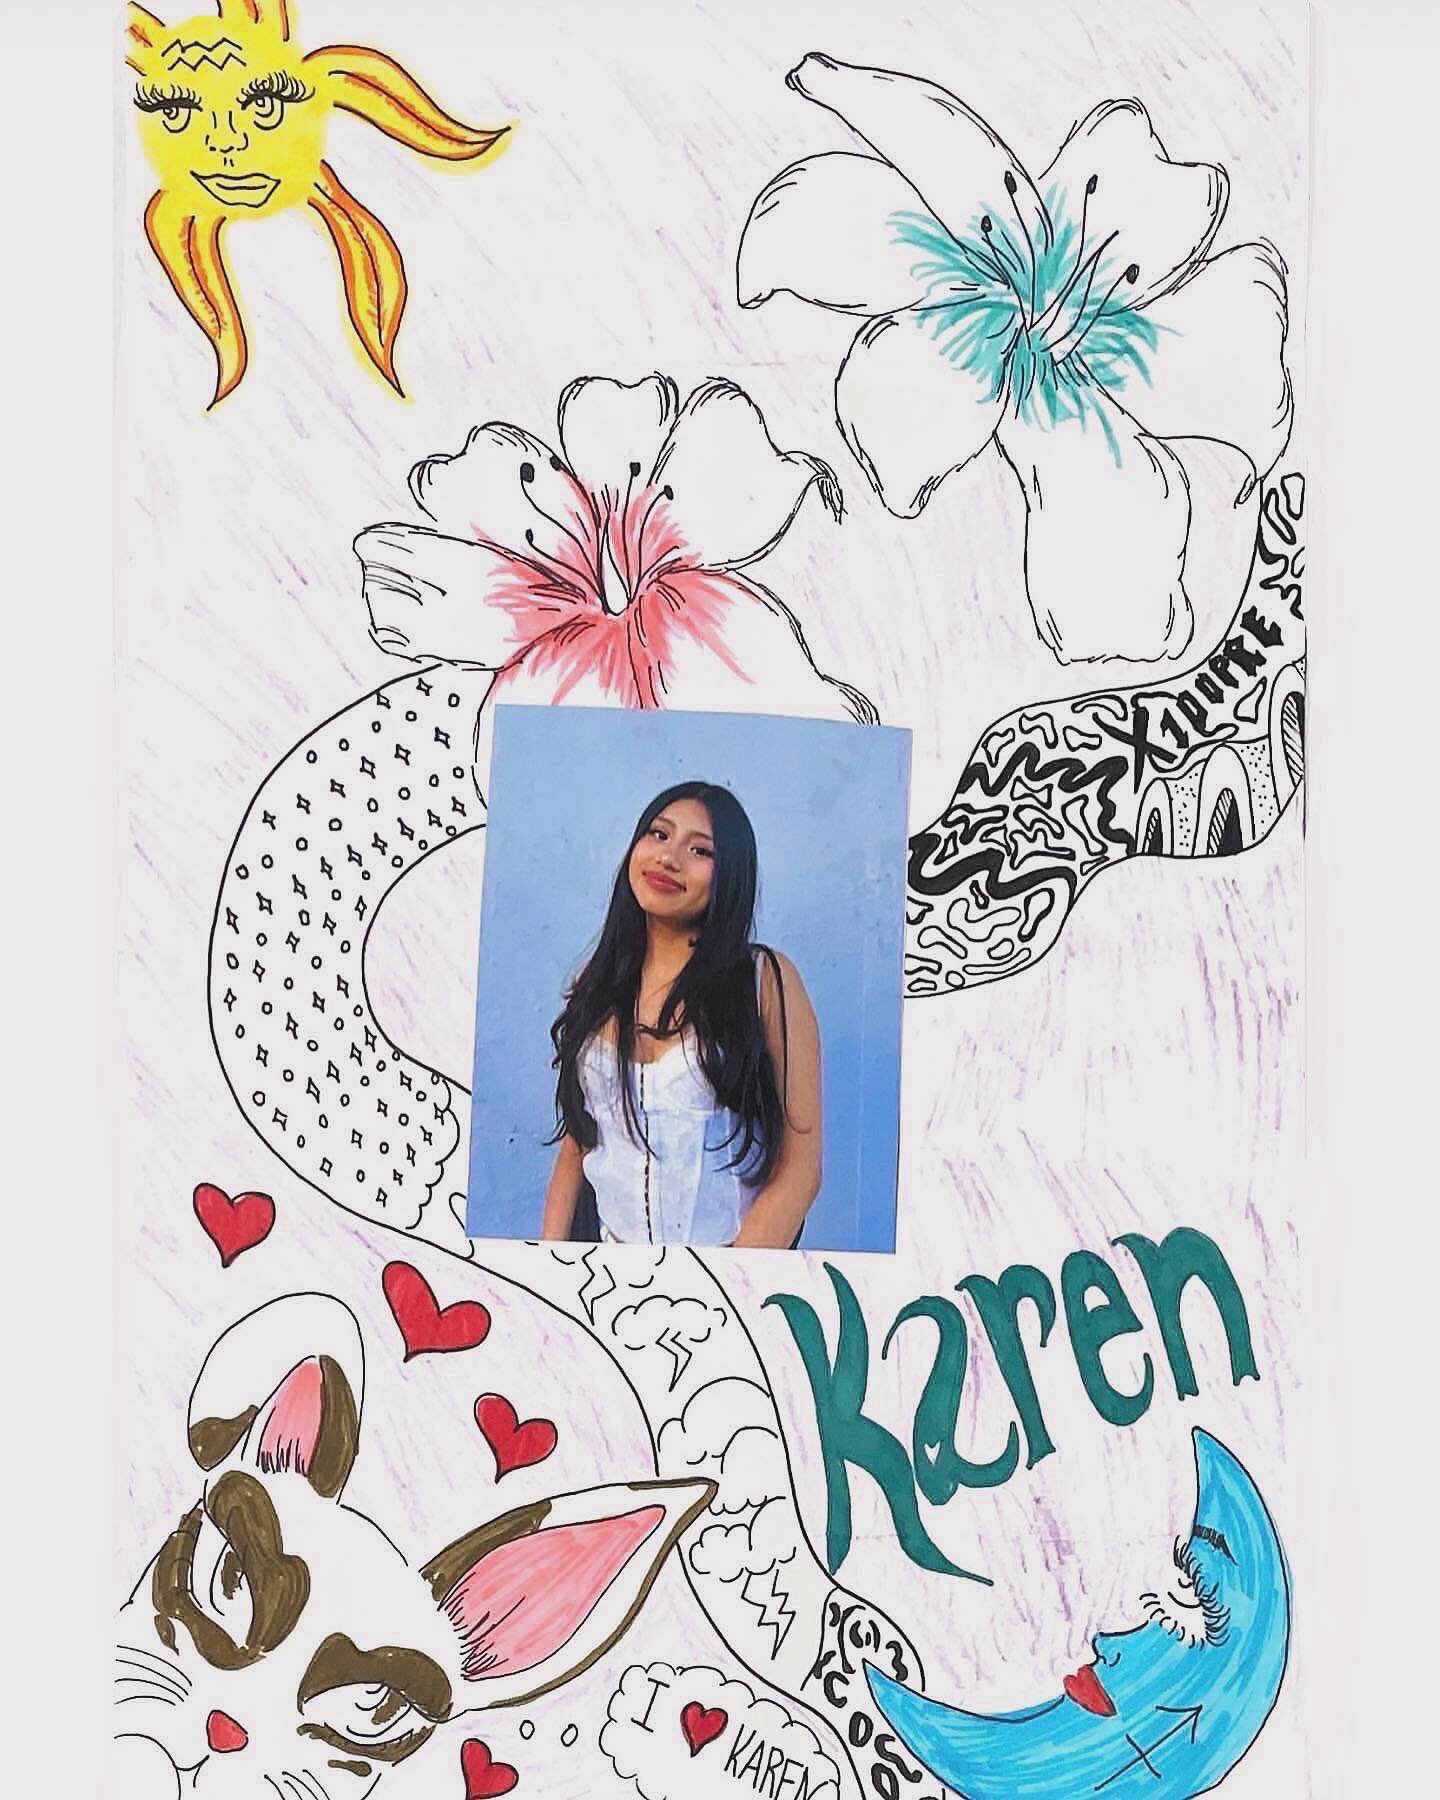 Haiii SHG😊🌟My name is Karen and I'm a new member of the youth committee. I love painting, dancing, and hanging out with my pet bunny🐇. I also love traveling and spending time with my loved ones. I am looking forward to discovering more of my artis